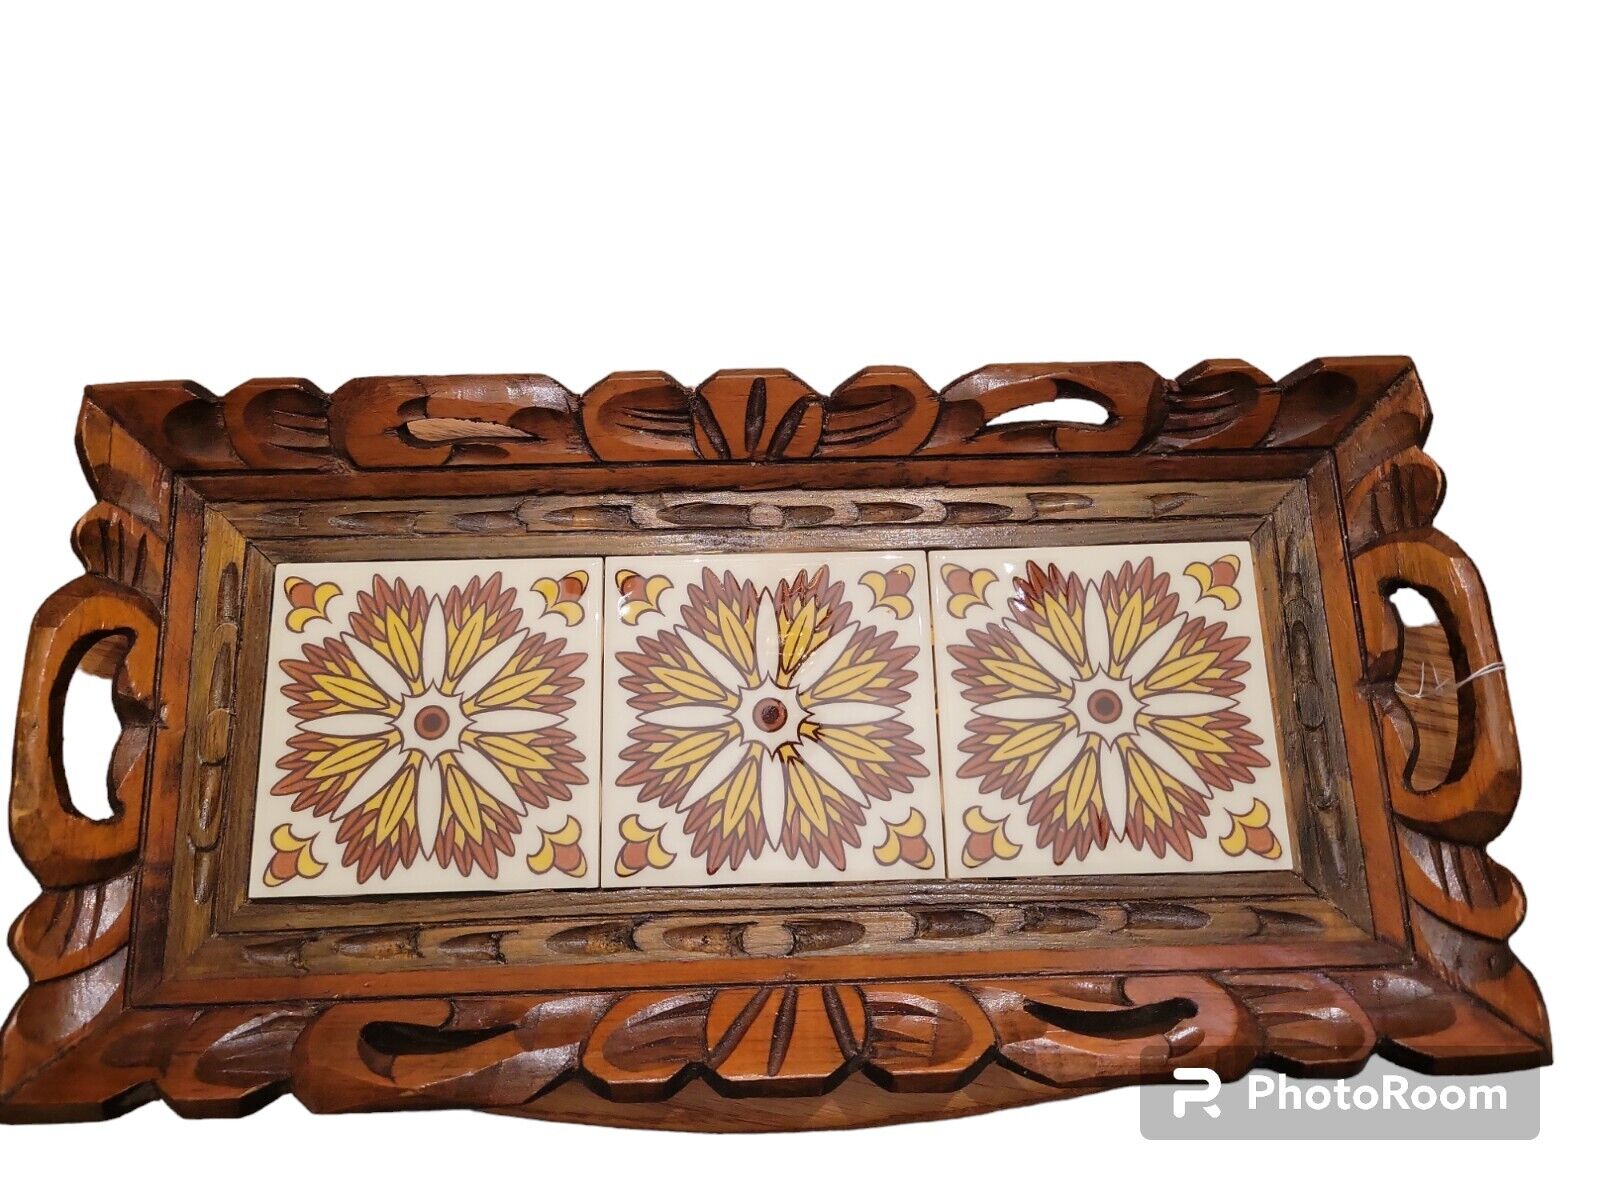 Vtg Mid Century Hand-Carved Wood Serving Tray Ceramic Tiles Earth tones18x9